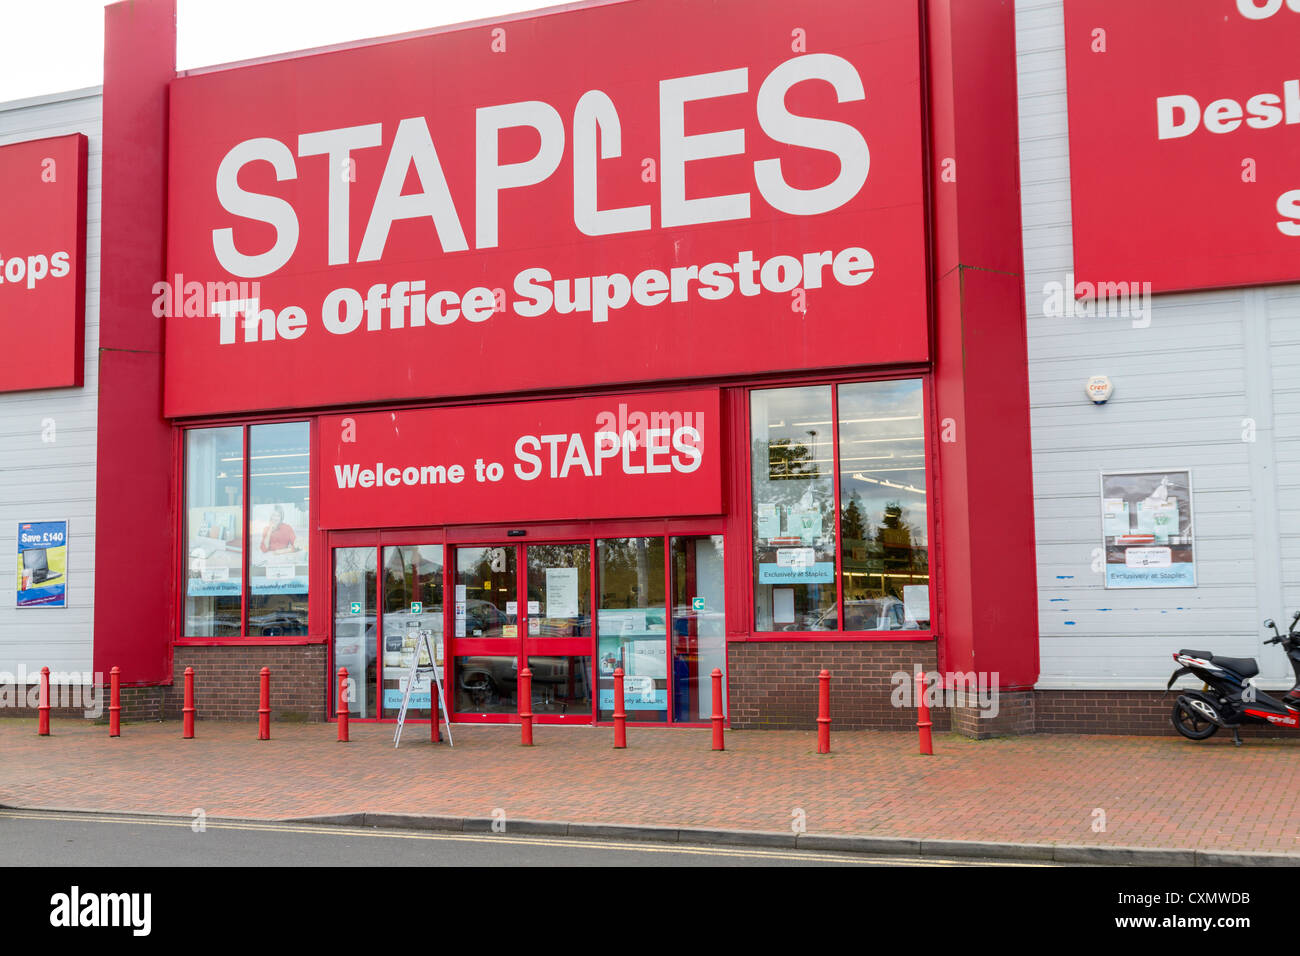 Staples Superstore in the Merry Hill shopping centre Brierley Hill West Midlands Stock Photo